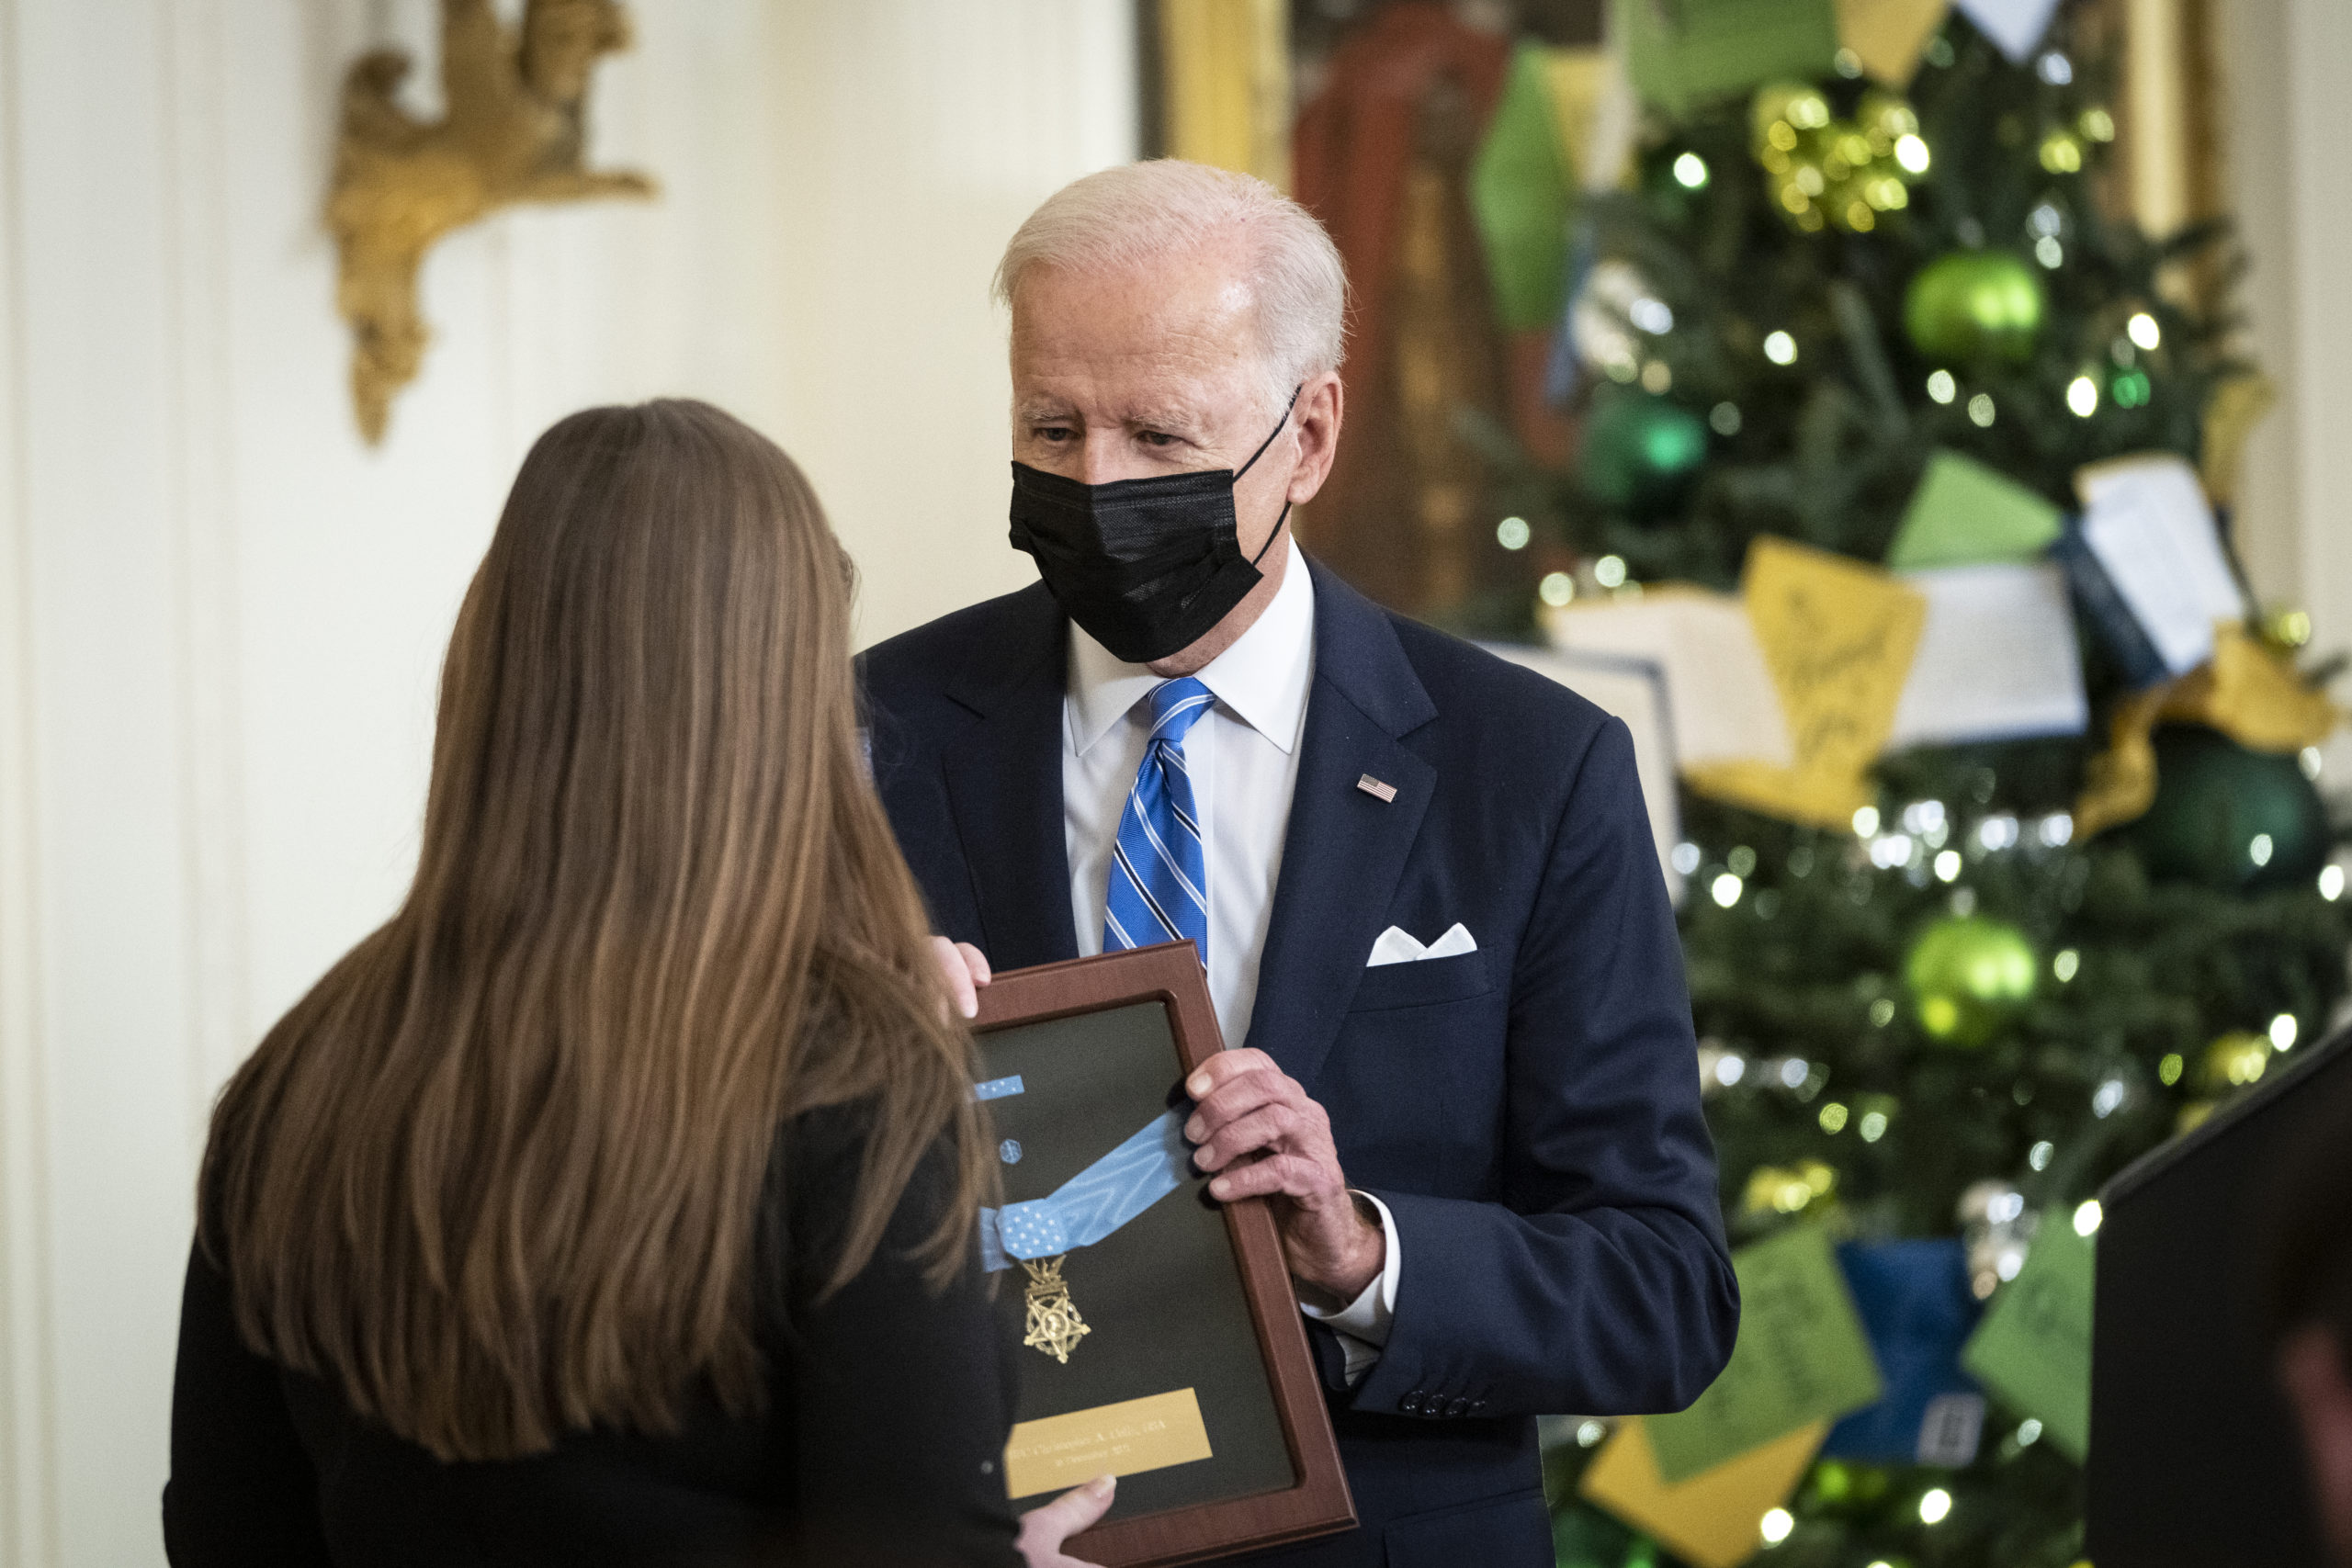 WASHINGTON, DC - DECEMBER 16: Katherine Celiz (L), widow of the late Sgt. 1st Class Christopher Celiz, accepts the Medal of Honor on his behalf from U.S. President Joe Biden during a ceremony in the East Room of the White House December 16, 2021 in Washington, DC. Sgt. Celiz was an Army Ranger and died fighting the Taliban in Afghanistan in 2018. He took on Taliban fighters to protect a helicopter that was carrying out a medical evacuation.(Photo by Drew Angerer/Getty Images)